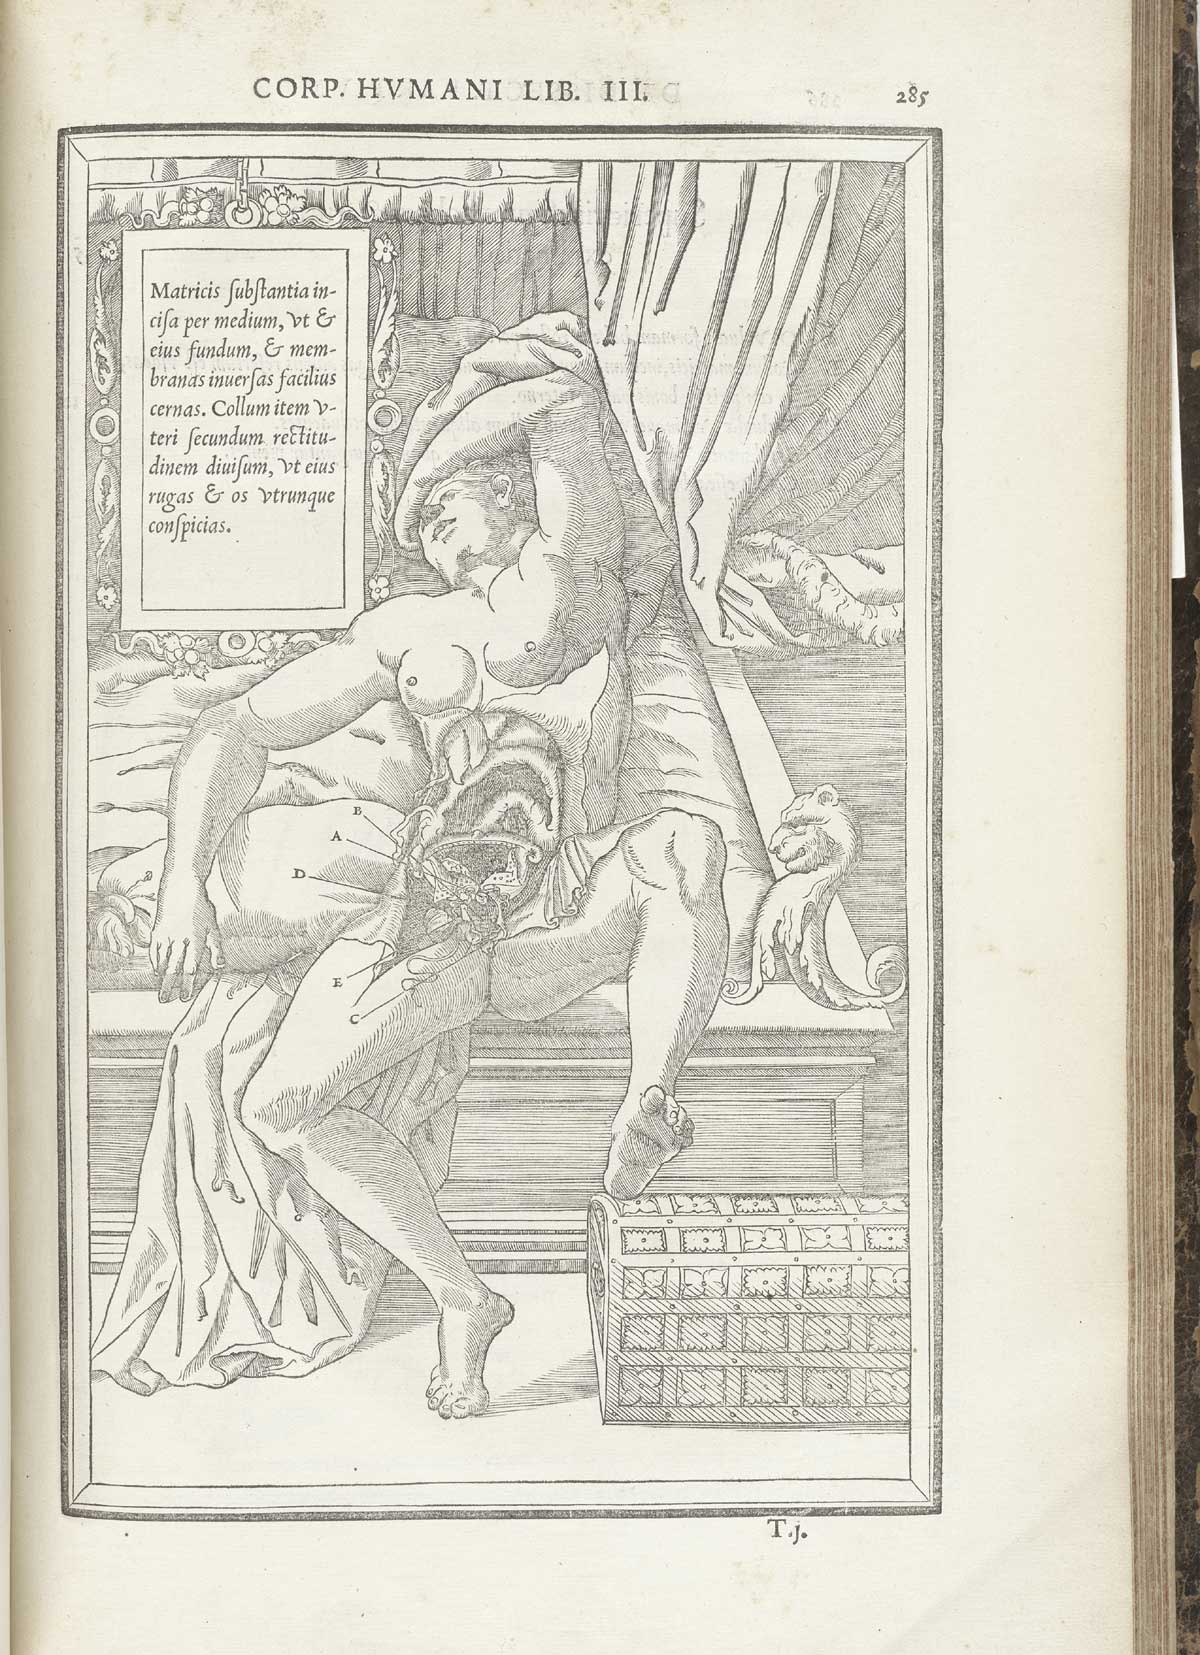 Woodcut of a female figure laying back on a bed with layers of flesh removed from the abdomen to reveal the uterus, cervix, and other reproductive organs; the woman has flowing hair and is facing upward, with her left arm wrapped around her forehead in a modest pose; a tablet giving text in Latin about the indicated body parts hangs above and to the left of the figure; from Charles Estienne’s De dissection partium corporis humani libri tres, NLM Call no.: WZ 240 E81dd 1545.